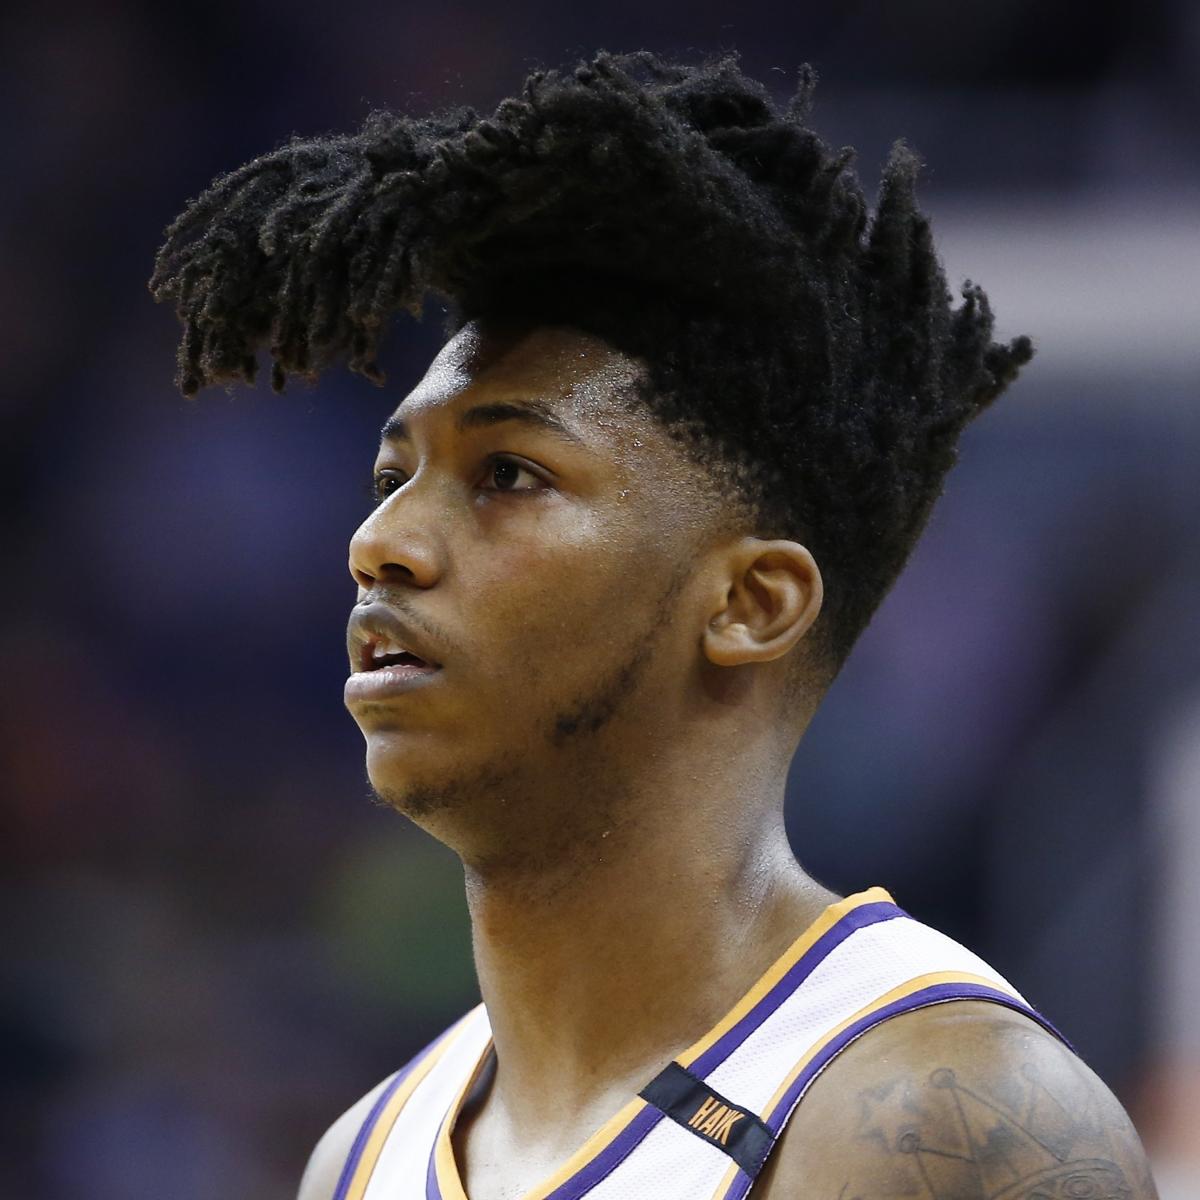 Suns PG Elfrid Payton Cuts Iconic Hair, Shows off New Look | Bleacher